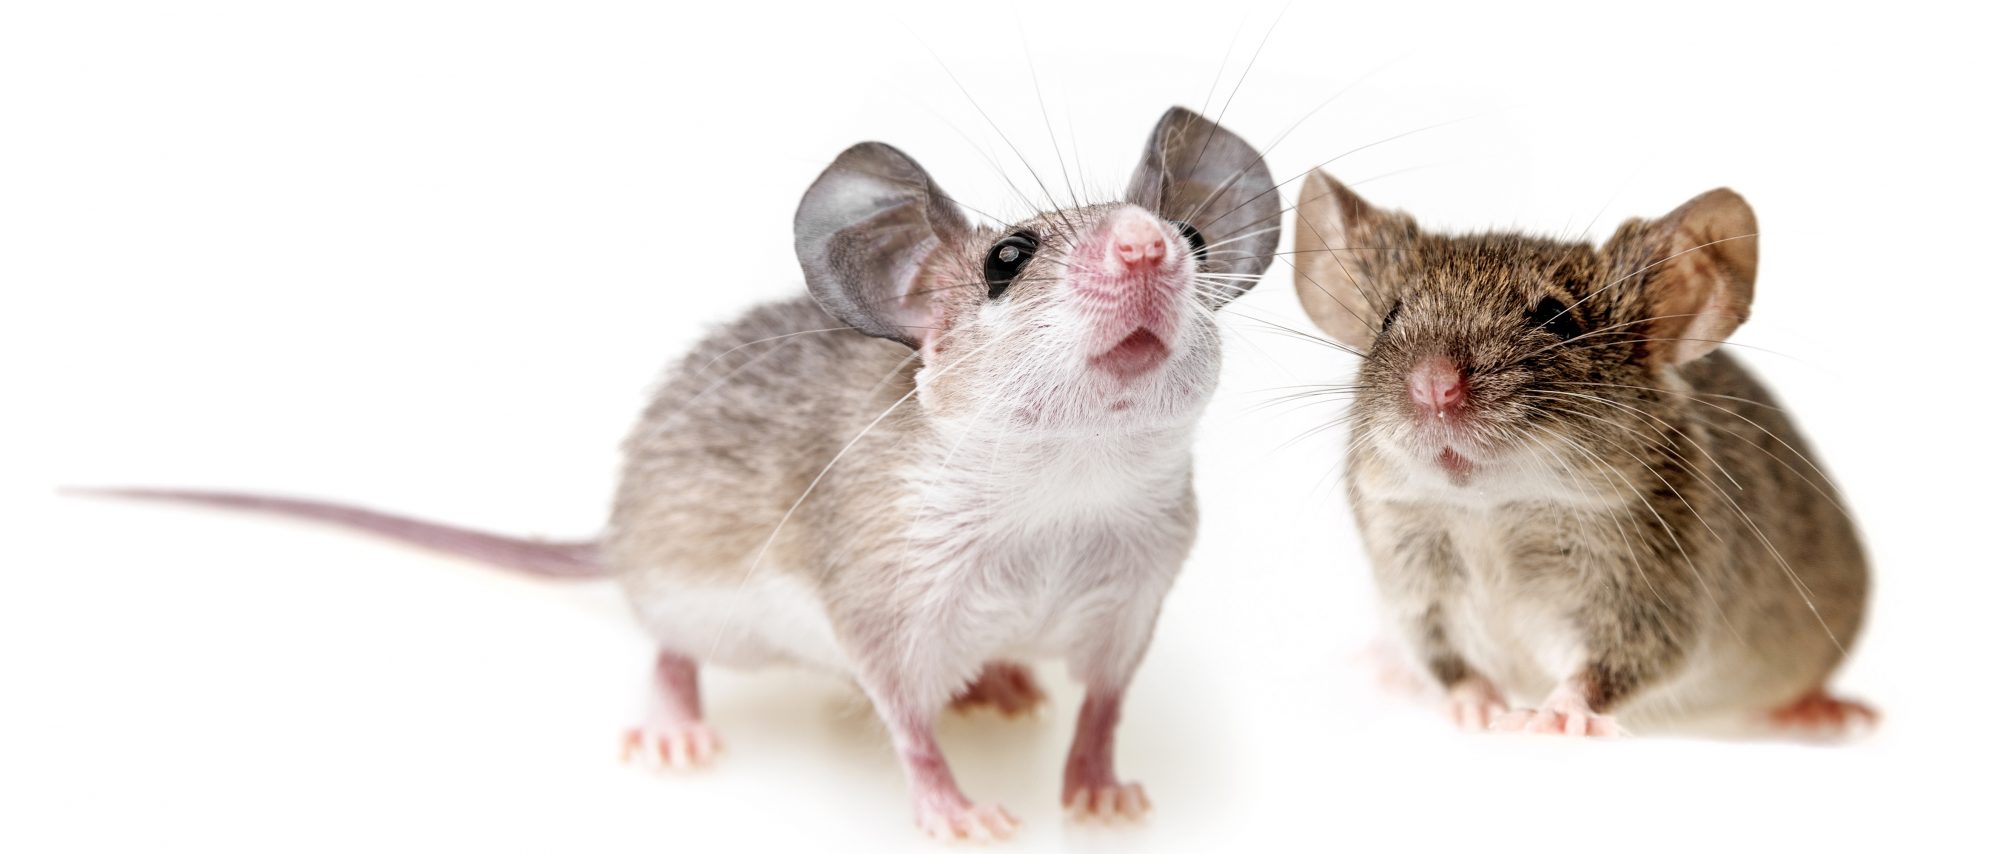 Can mice be an effective model animal for Covid-19?